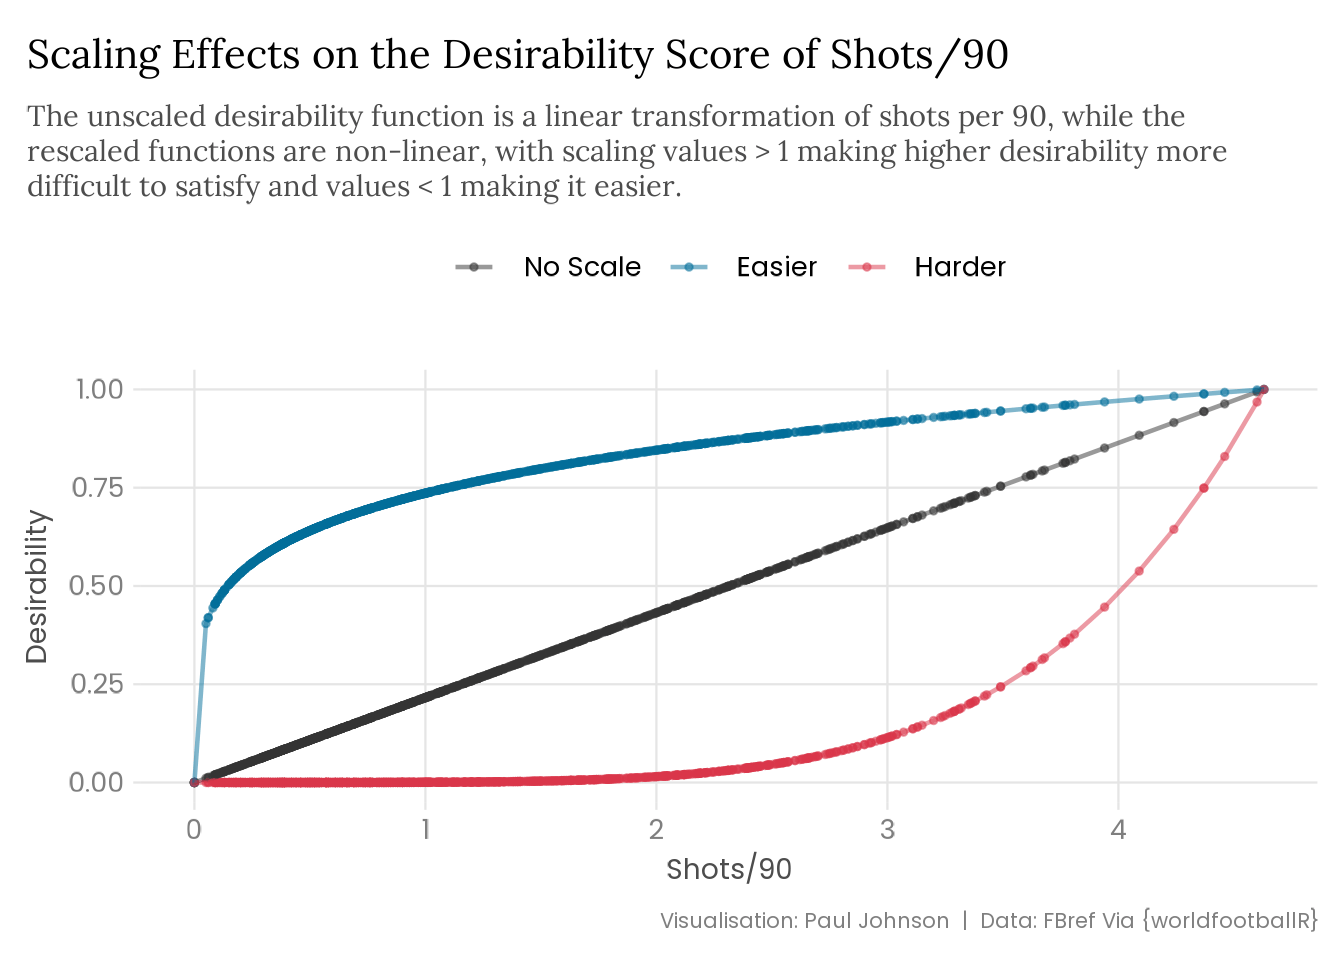 A line plot illustrating the effects of scaling features on desirability functions, using shots per 90 as the example. The plot demonstrates that values greater than 1 make it harder for desirability functions to reach maximal desirability, illustrated using a scaling feature of 5, where lower values are given much lower desirability scores and as values increase desirability increases exponentially. It also demonstrates that values lower than 1 make it easier for desirability functions to reach maximal desirability, illustrated using a scaling feature of 0.2, where lower values are given much higher desirability scores but as values increase desirability does not increase significantly. 